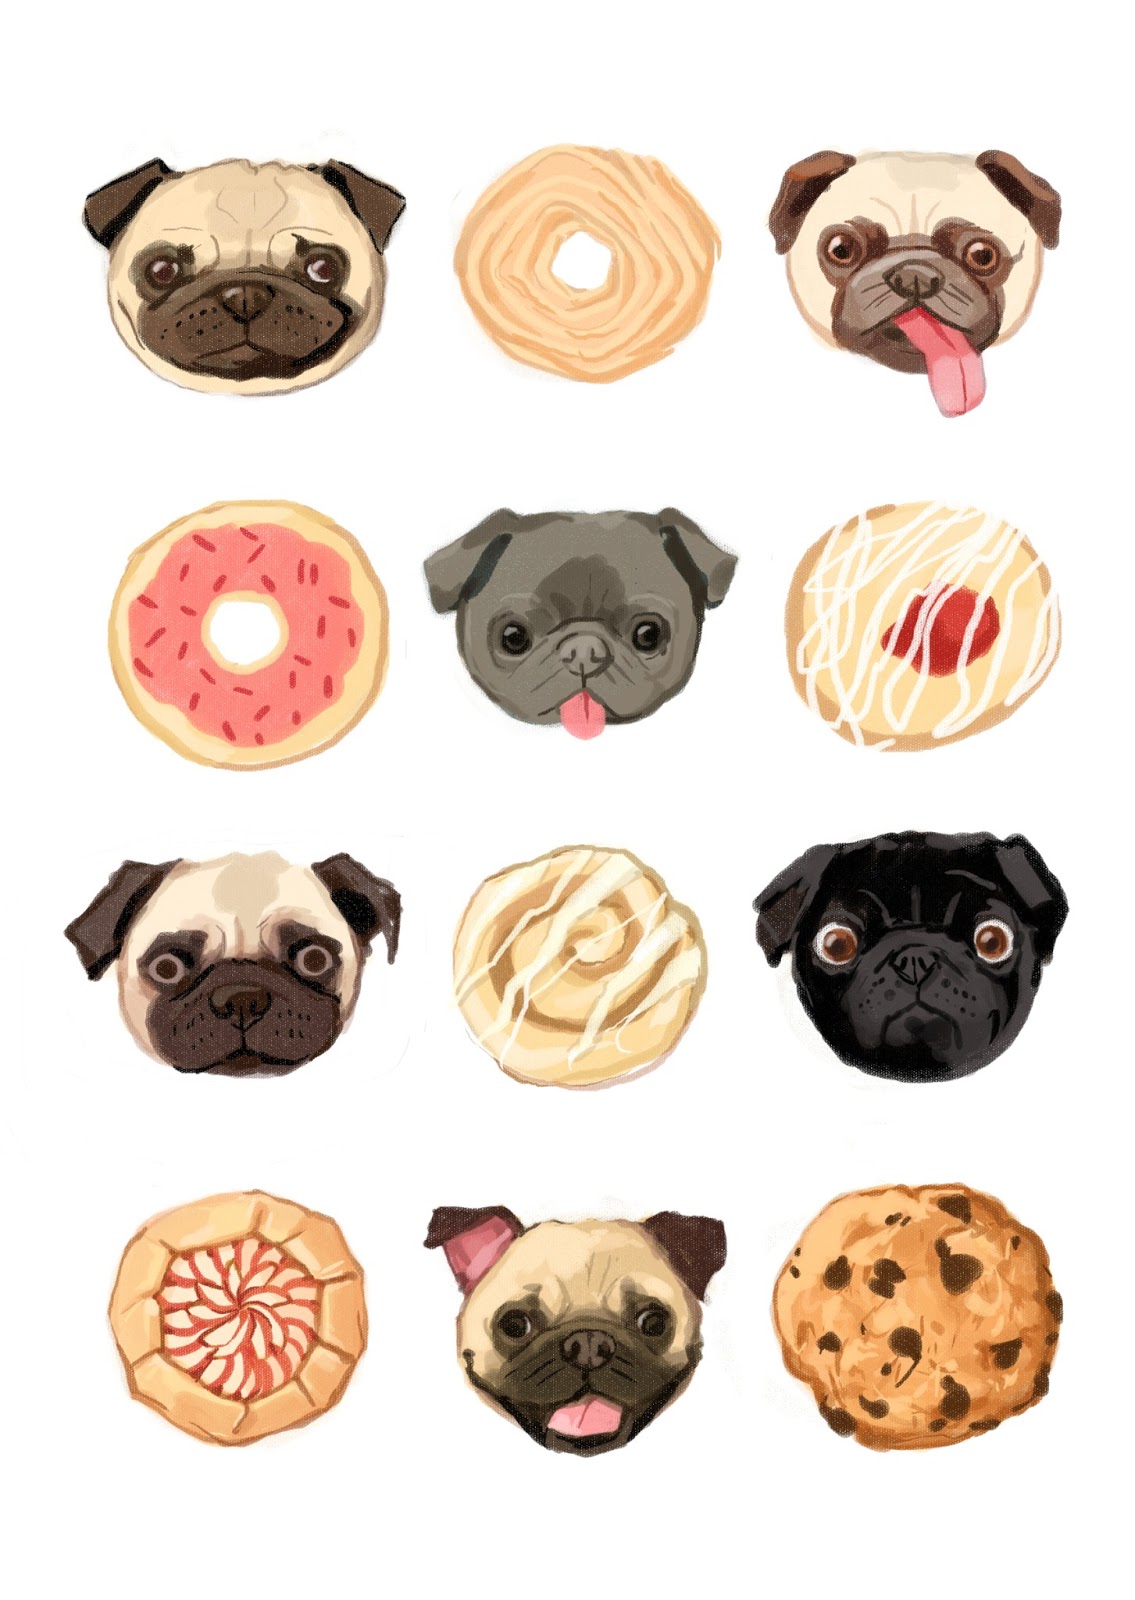 Pug Cookie Wallpaper Pictures Photos Image Dog Breeds